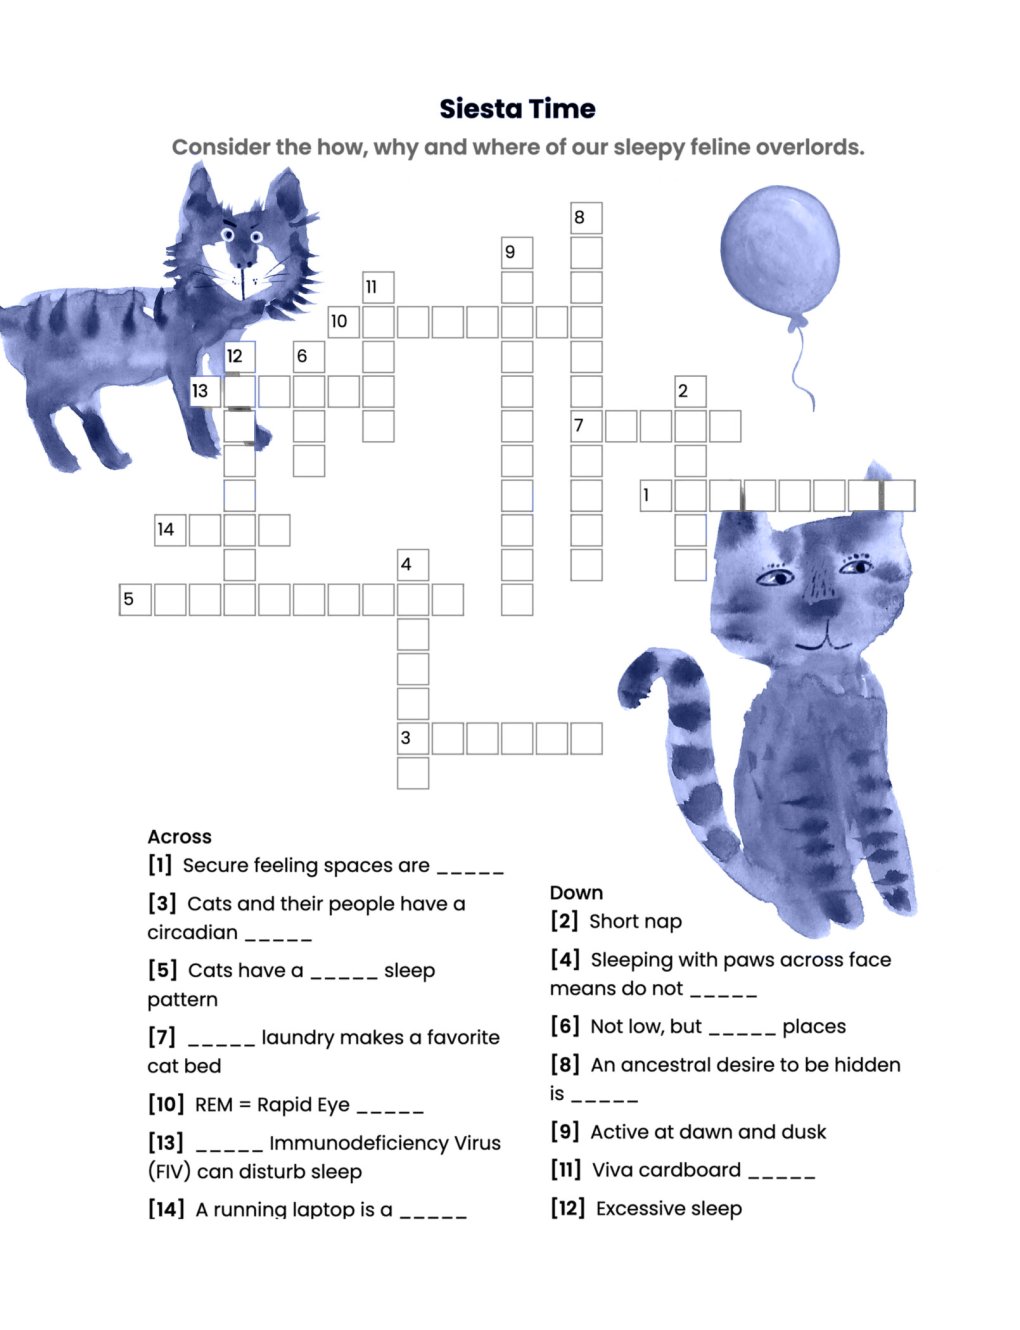 Cat Sleep Related Word Puzzle: Test Your Knowledge!